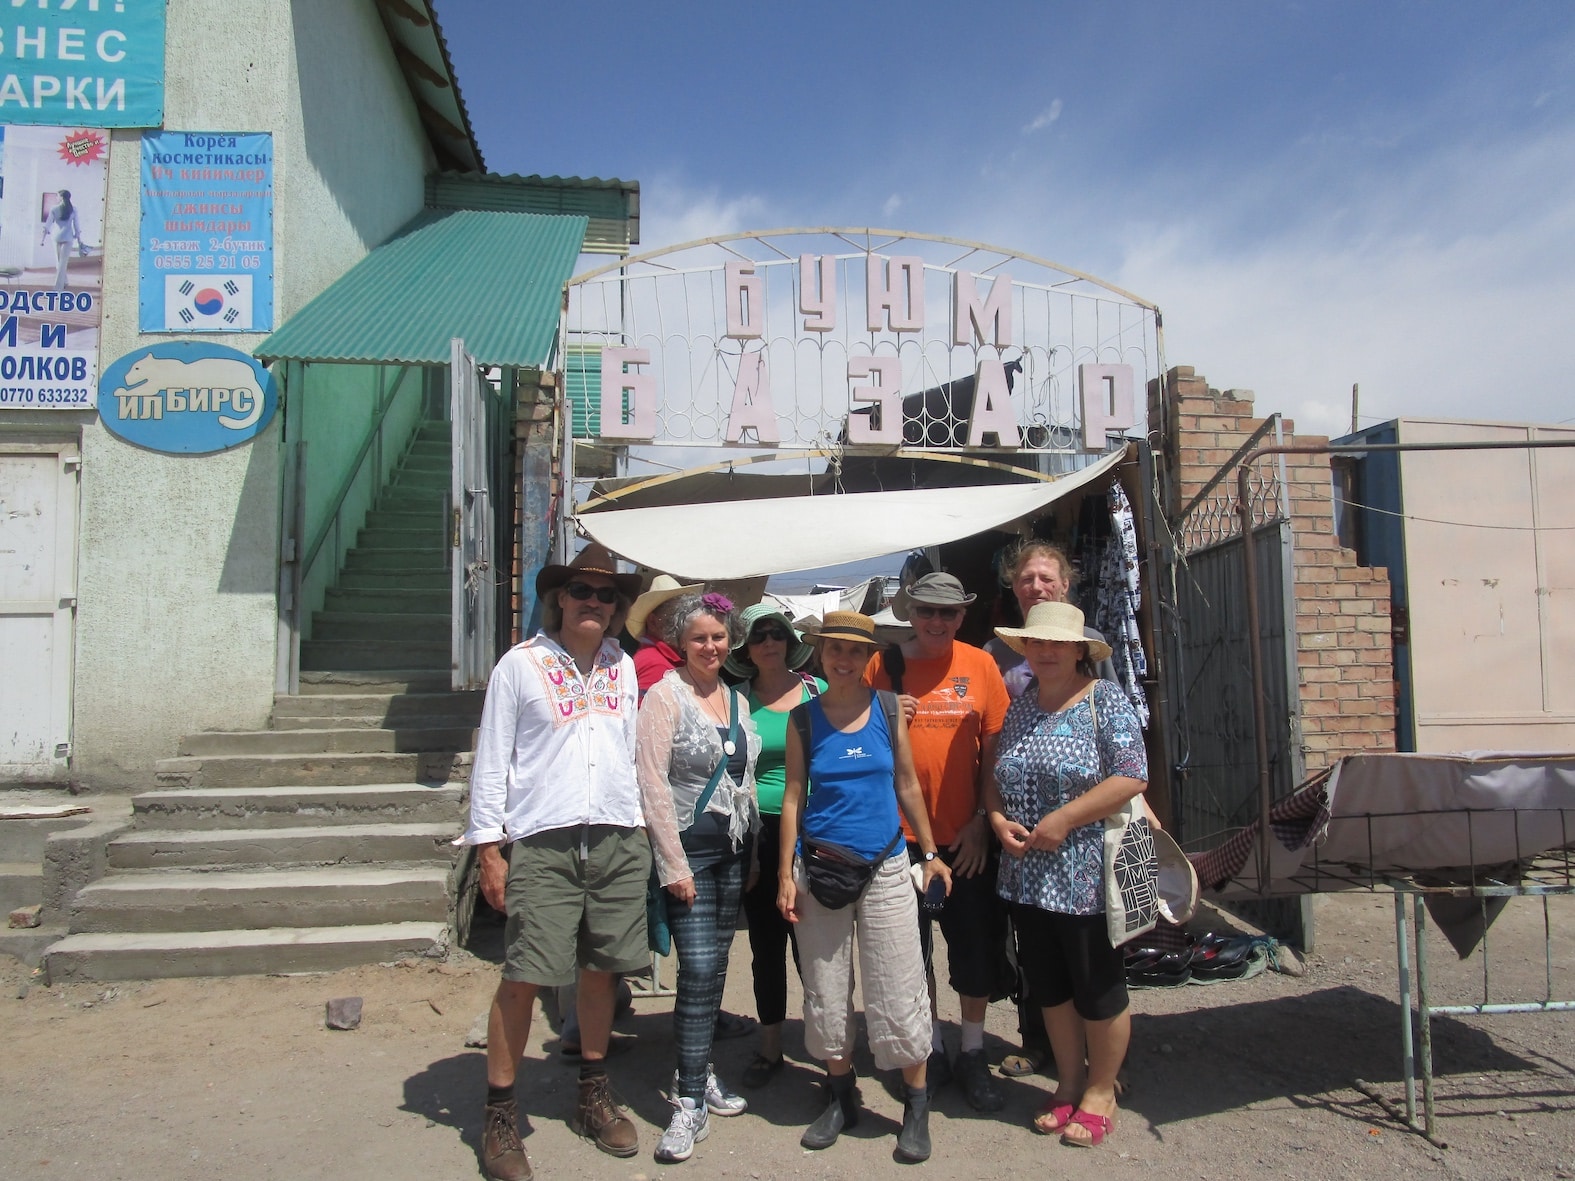 The Gang outside the market in Osh